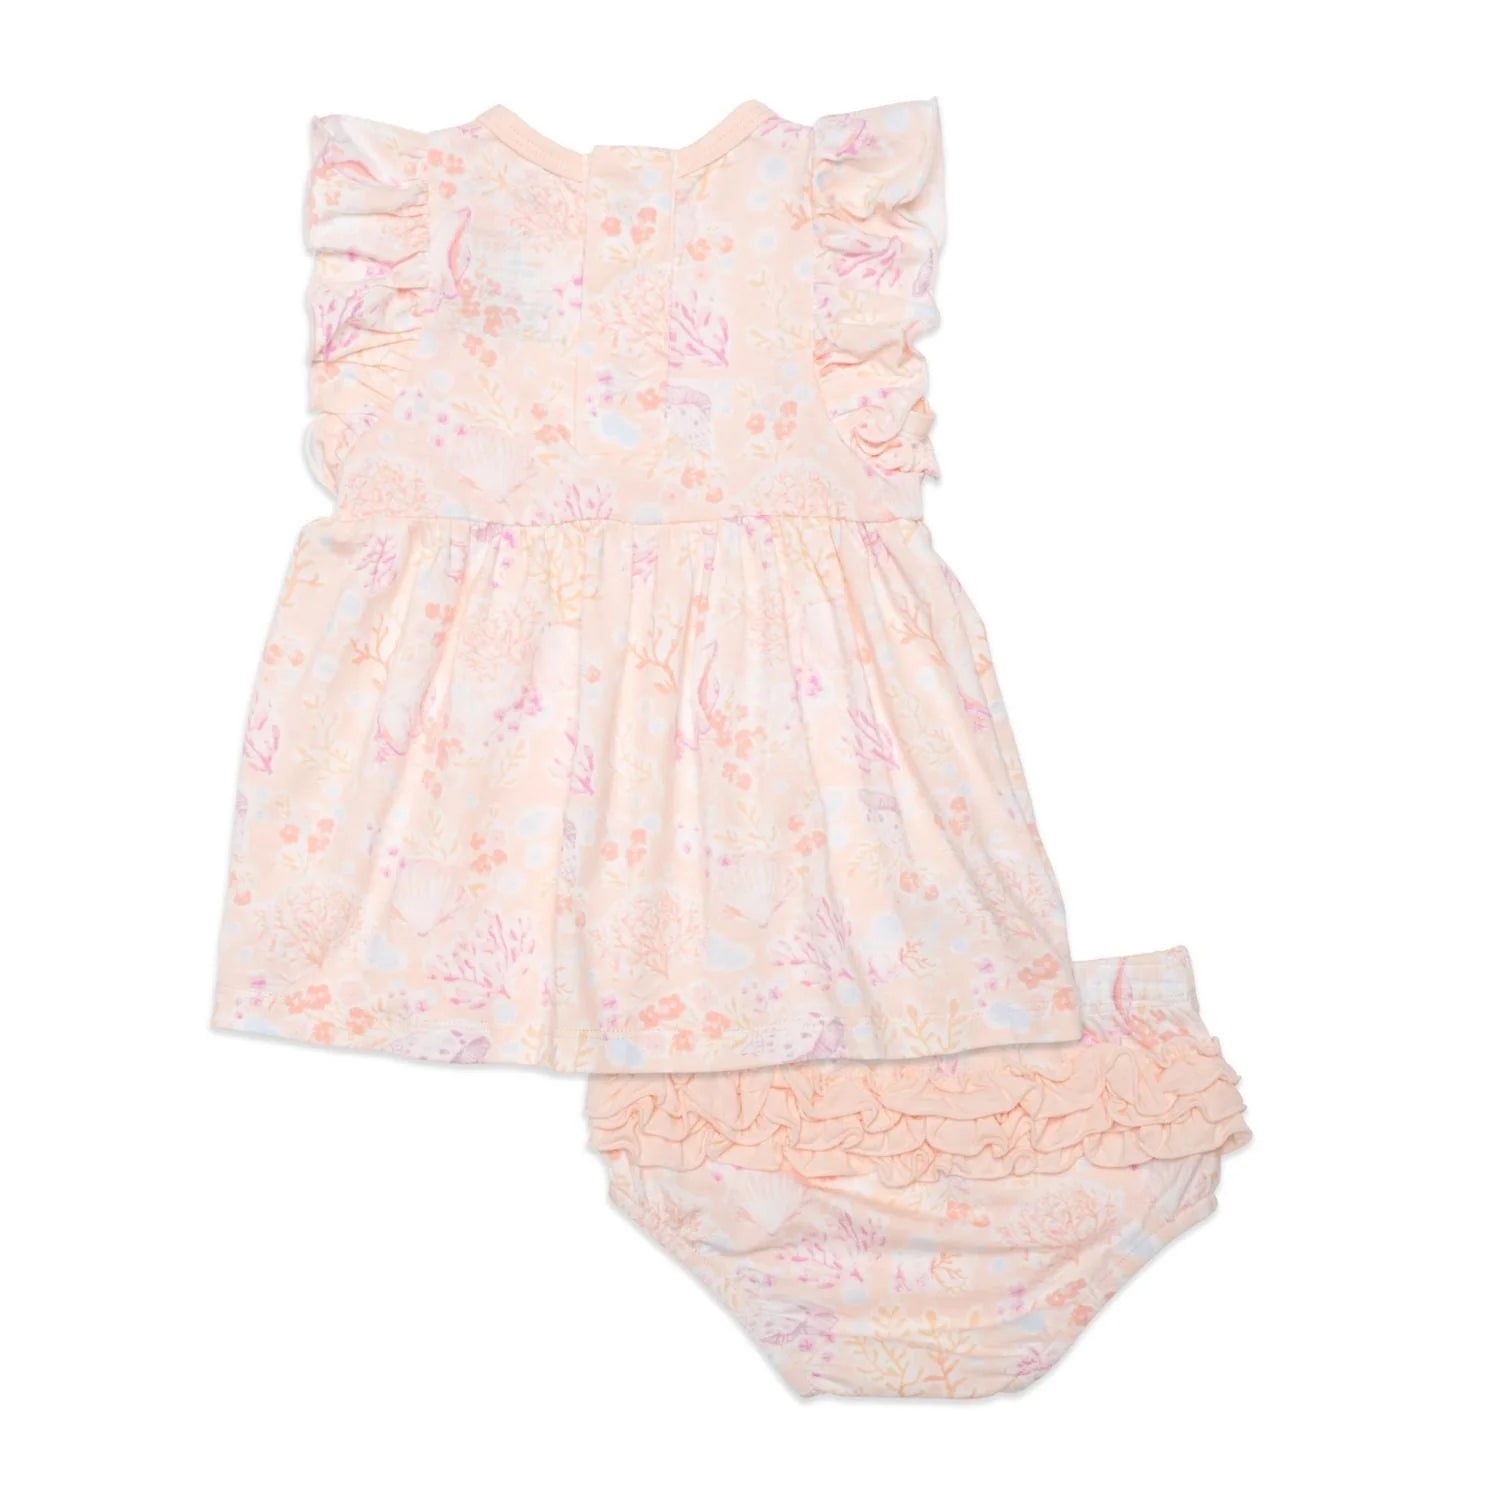 Coral Floral Ruf Sleeve Dress + Diaper Cover